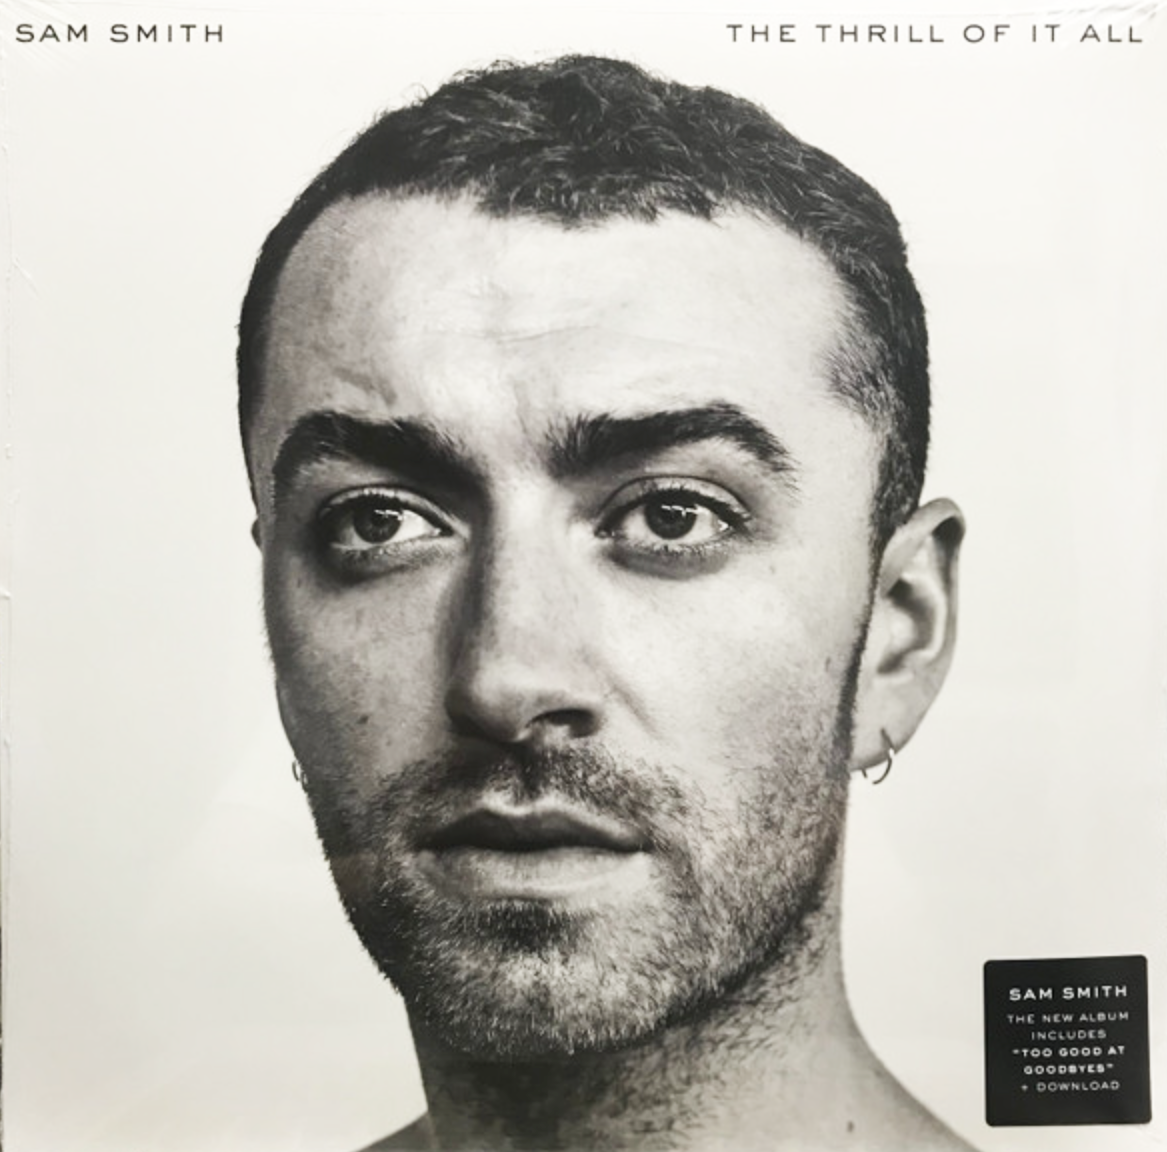 The Thrill of It All (White Vinyl + MP3 Download)